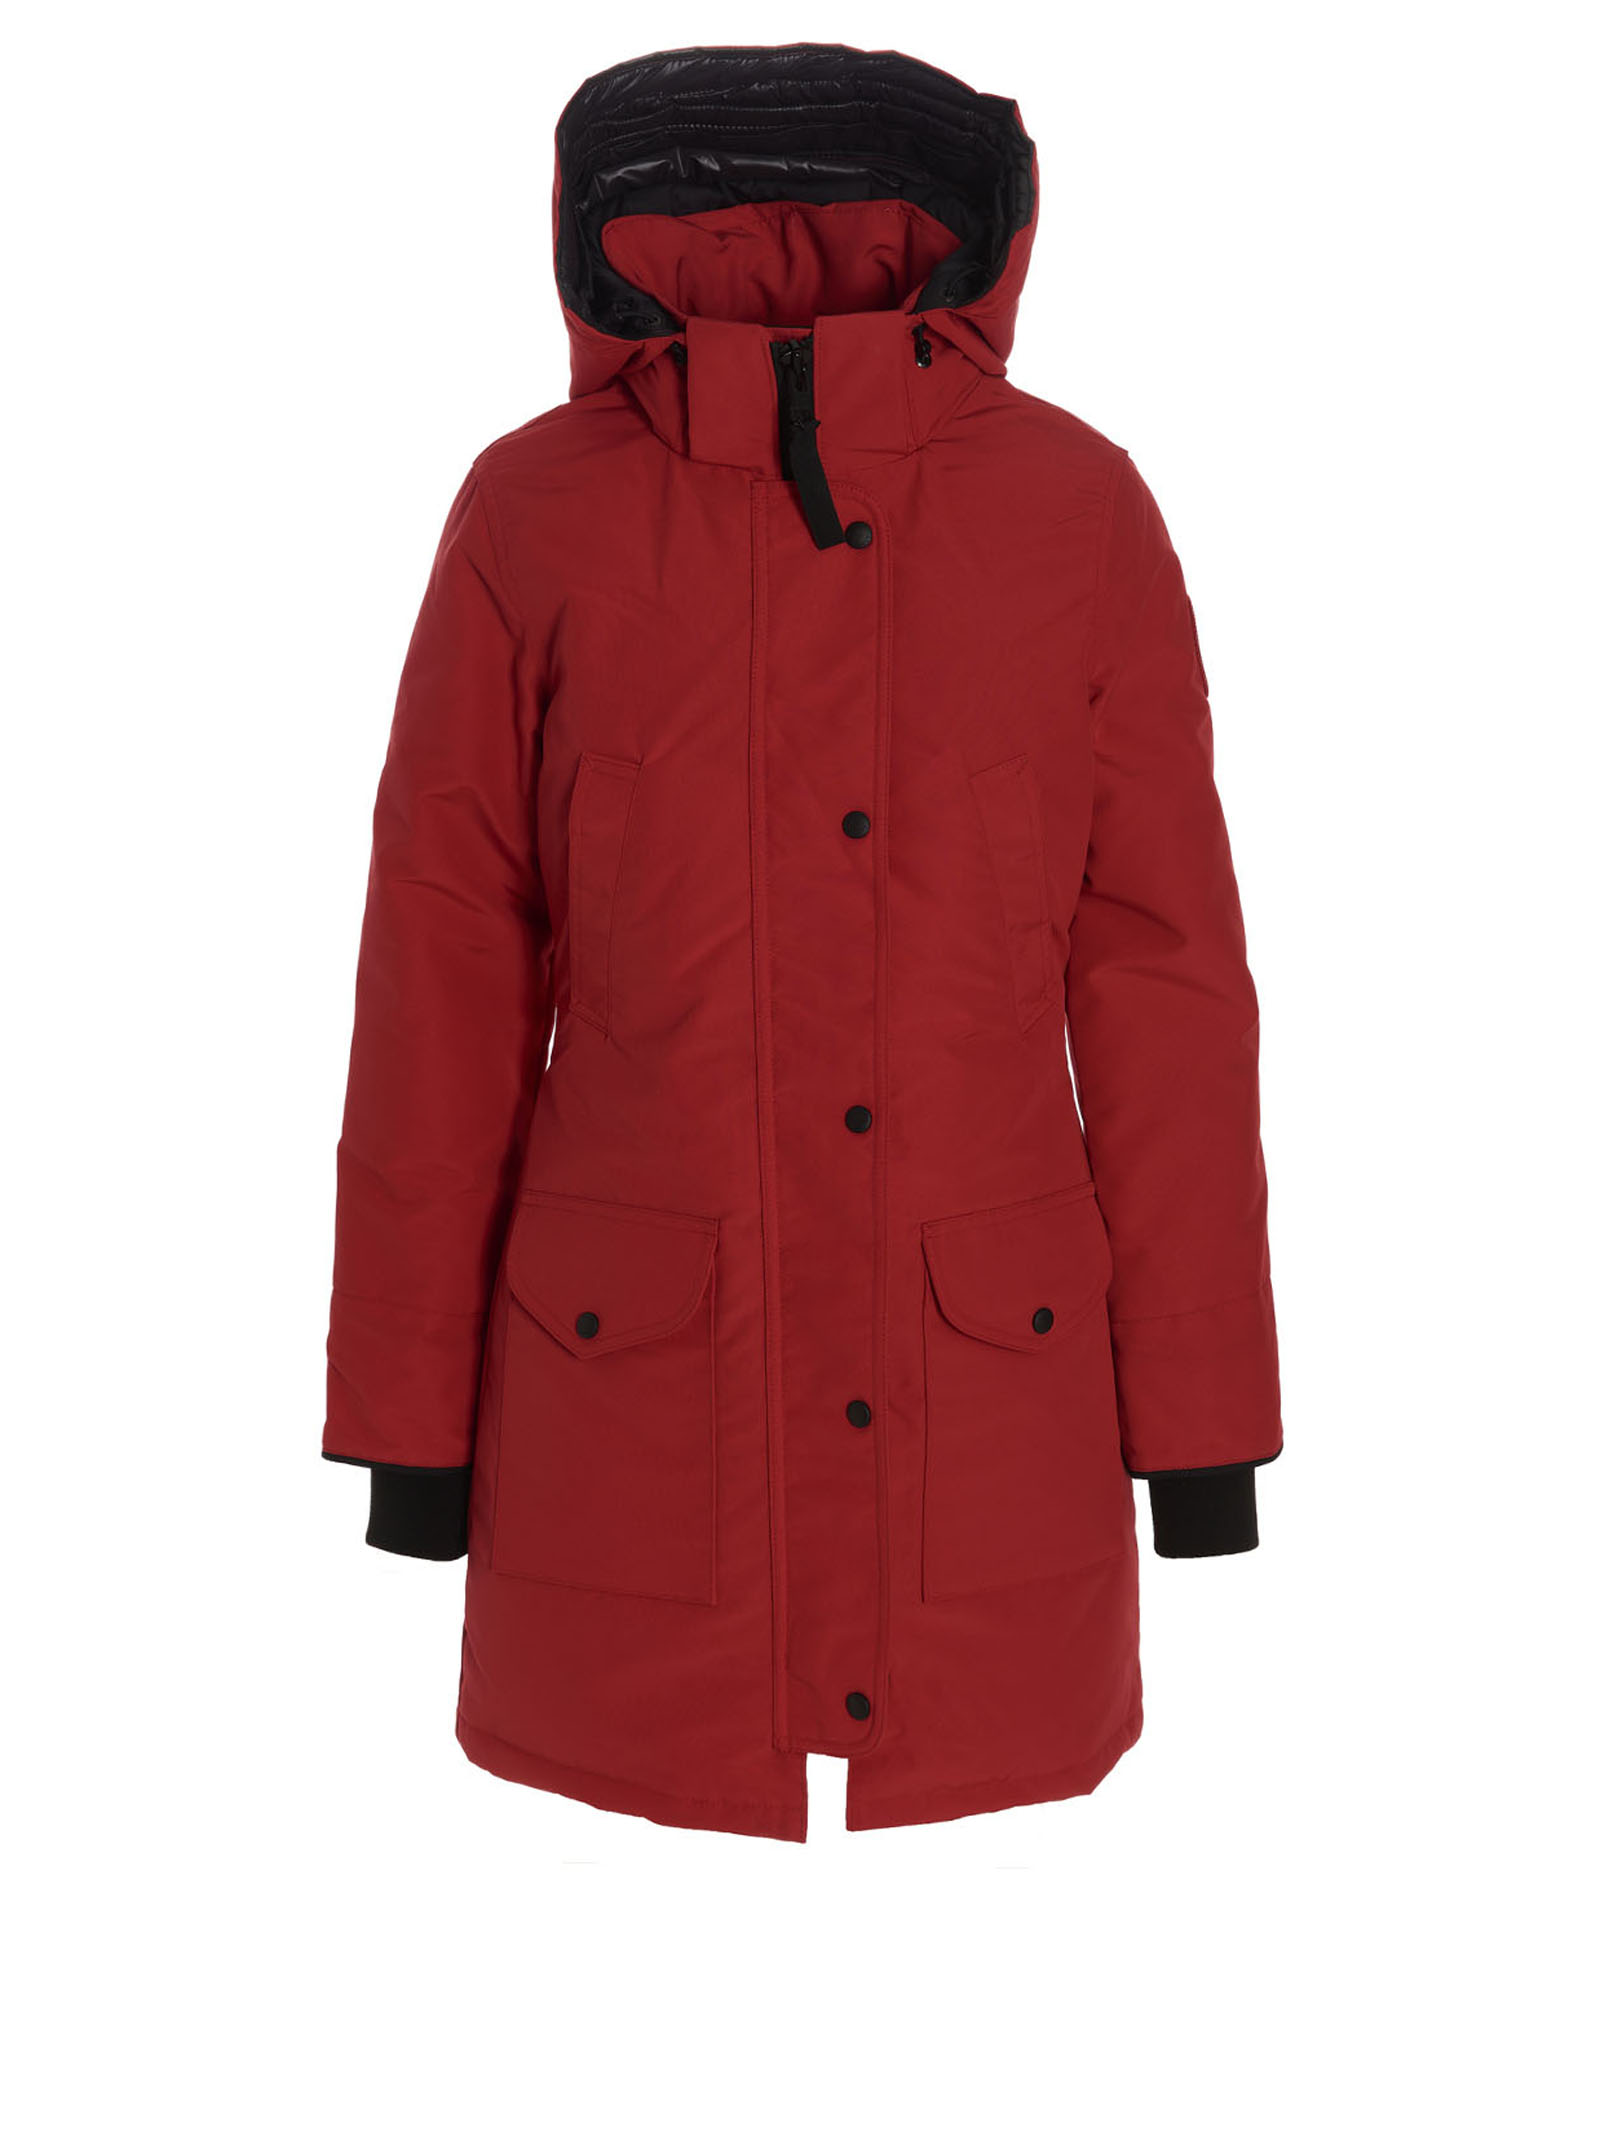 CANADA GOOSE WOMEN'S OUTWEAR - CANADA GOOSE - IN RED SYNTHETIC FIBERS